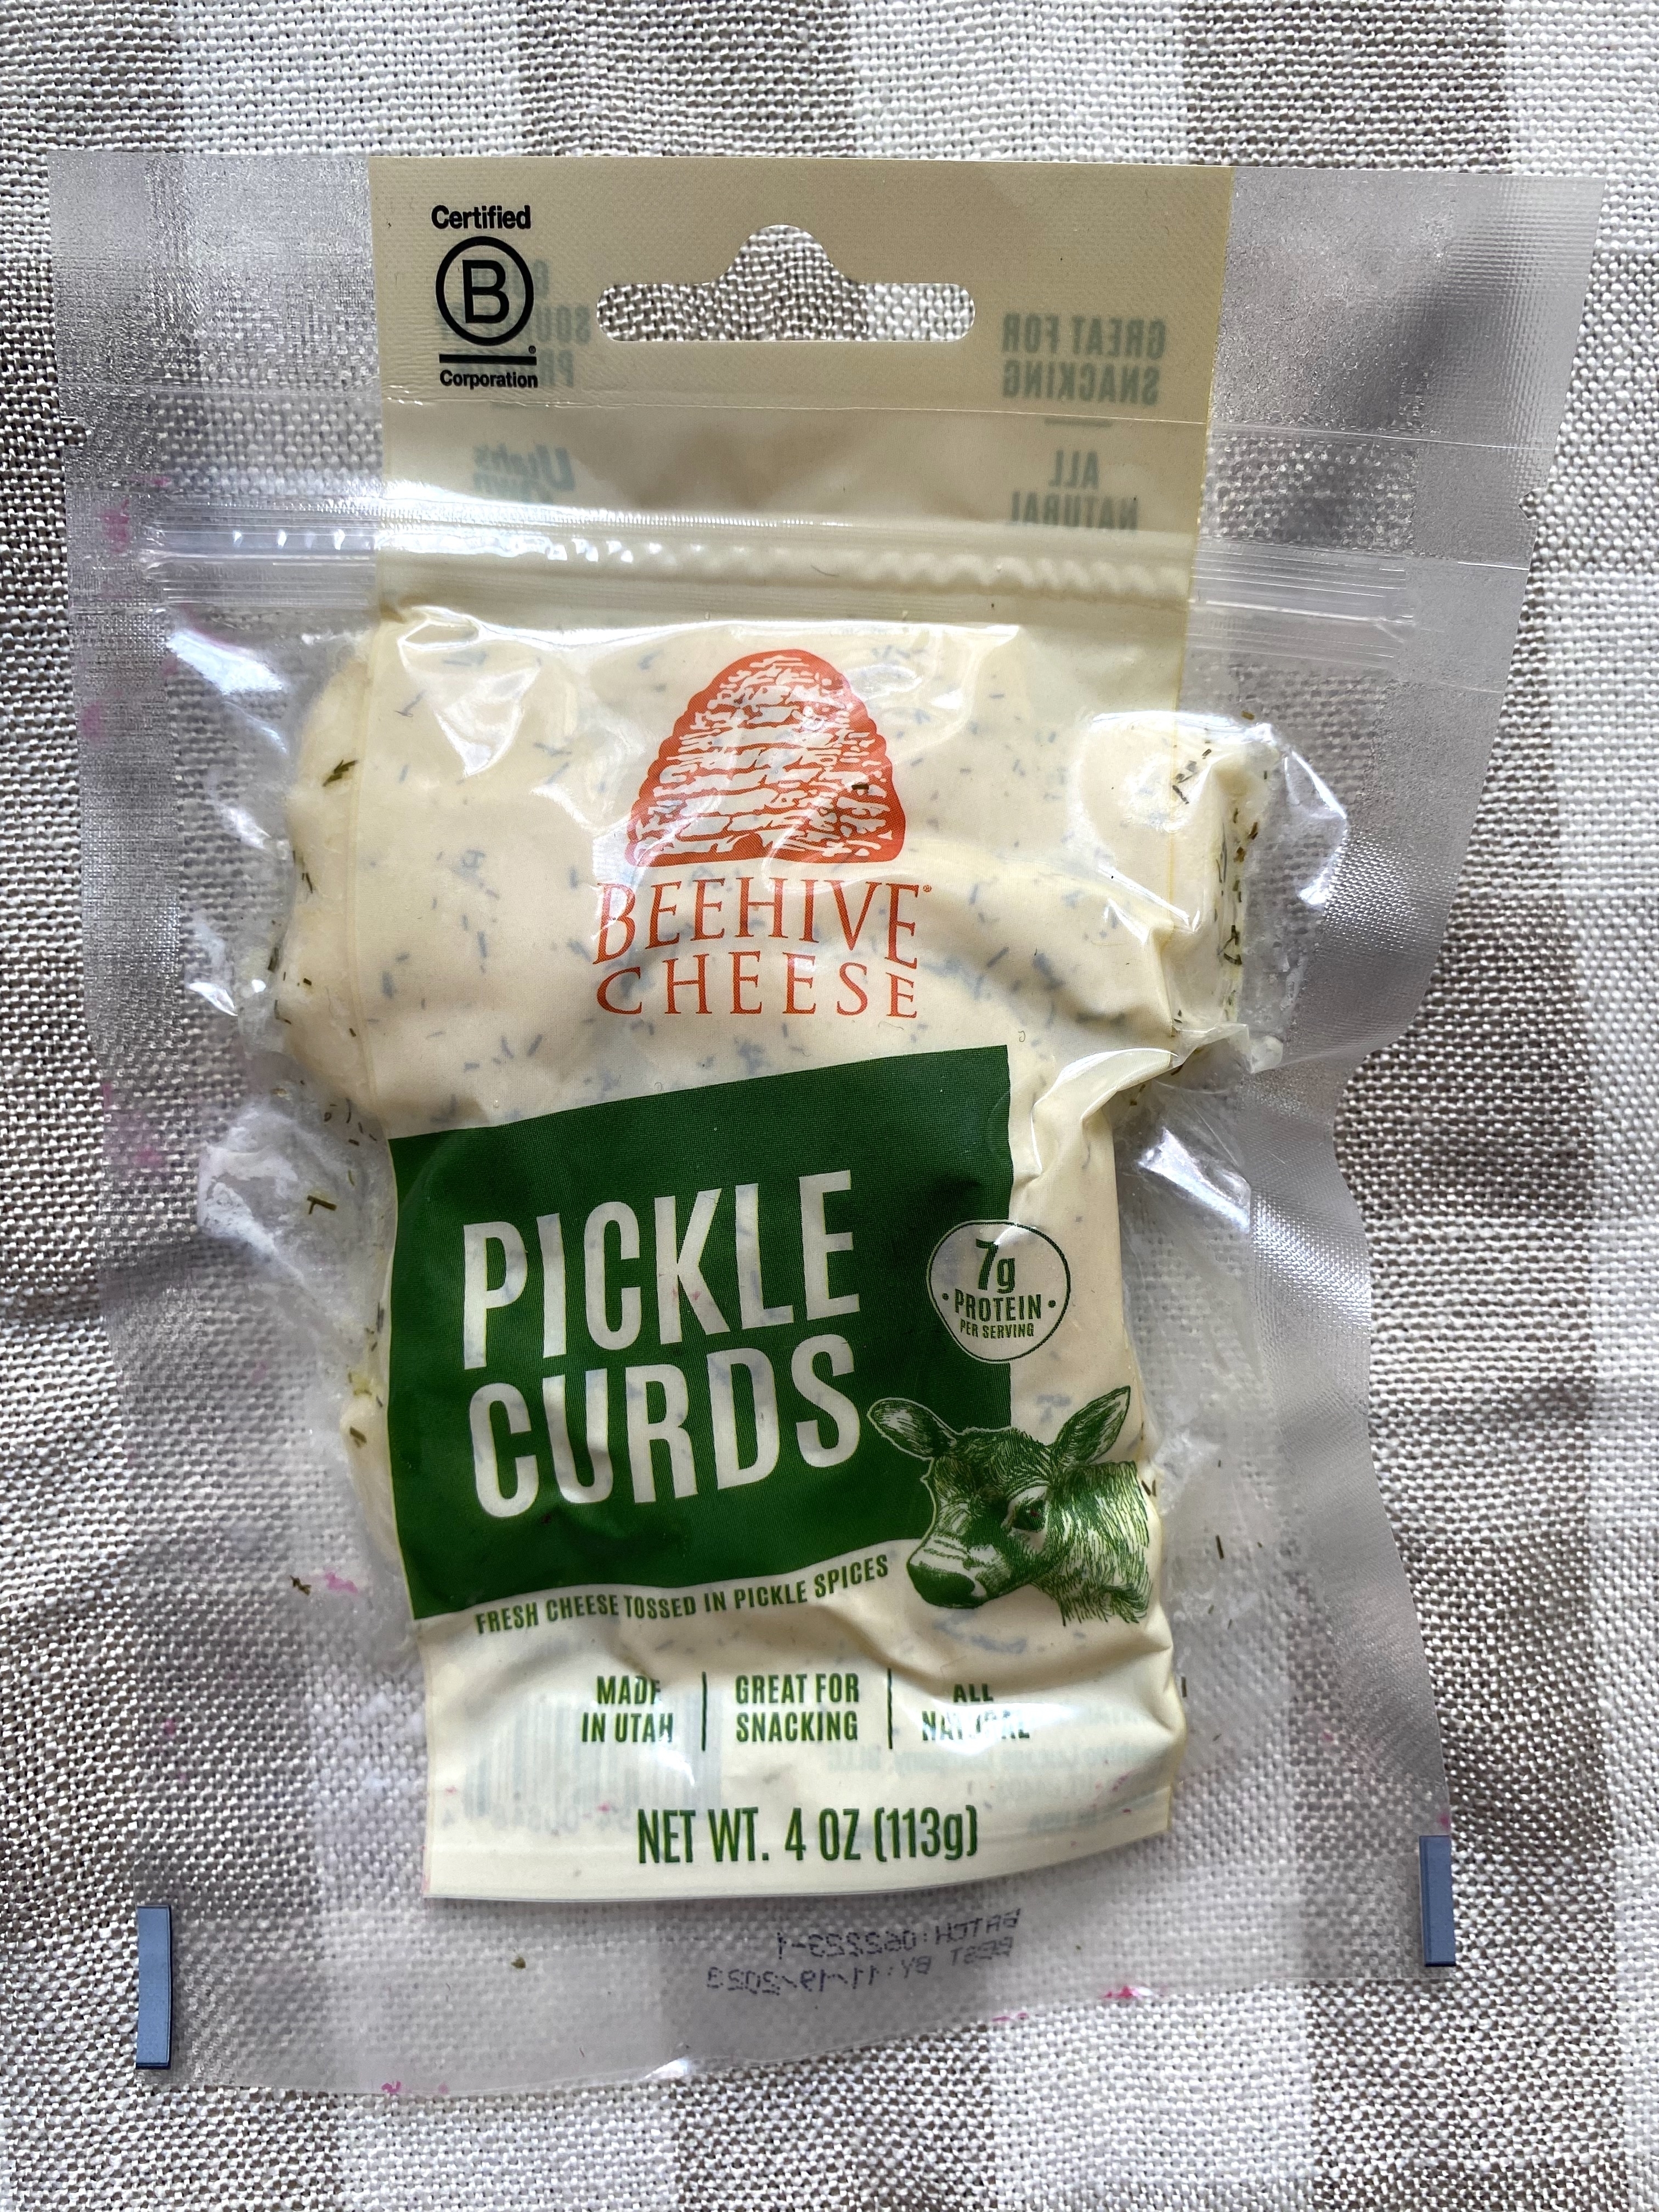 Package of Beehive Cheese Pickle Curds on a textured background